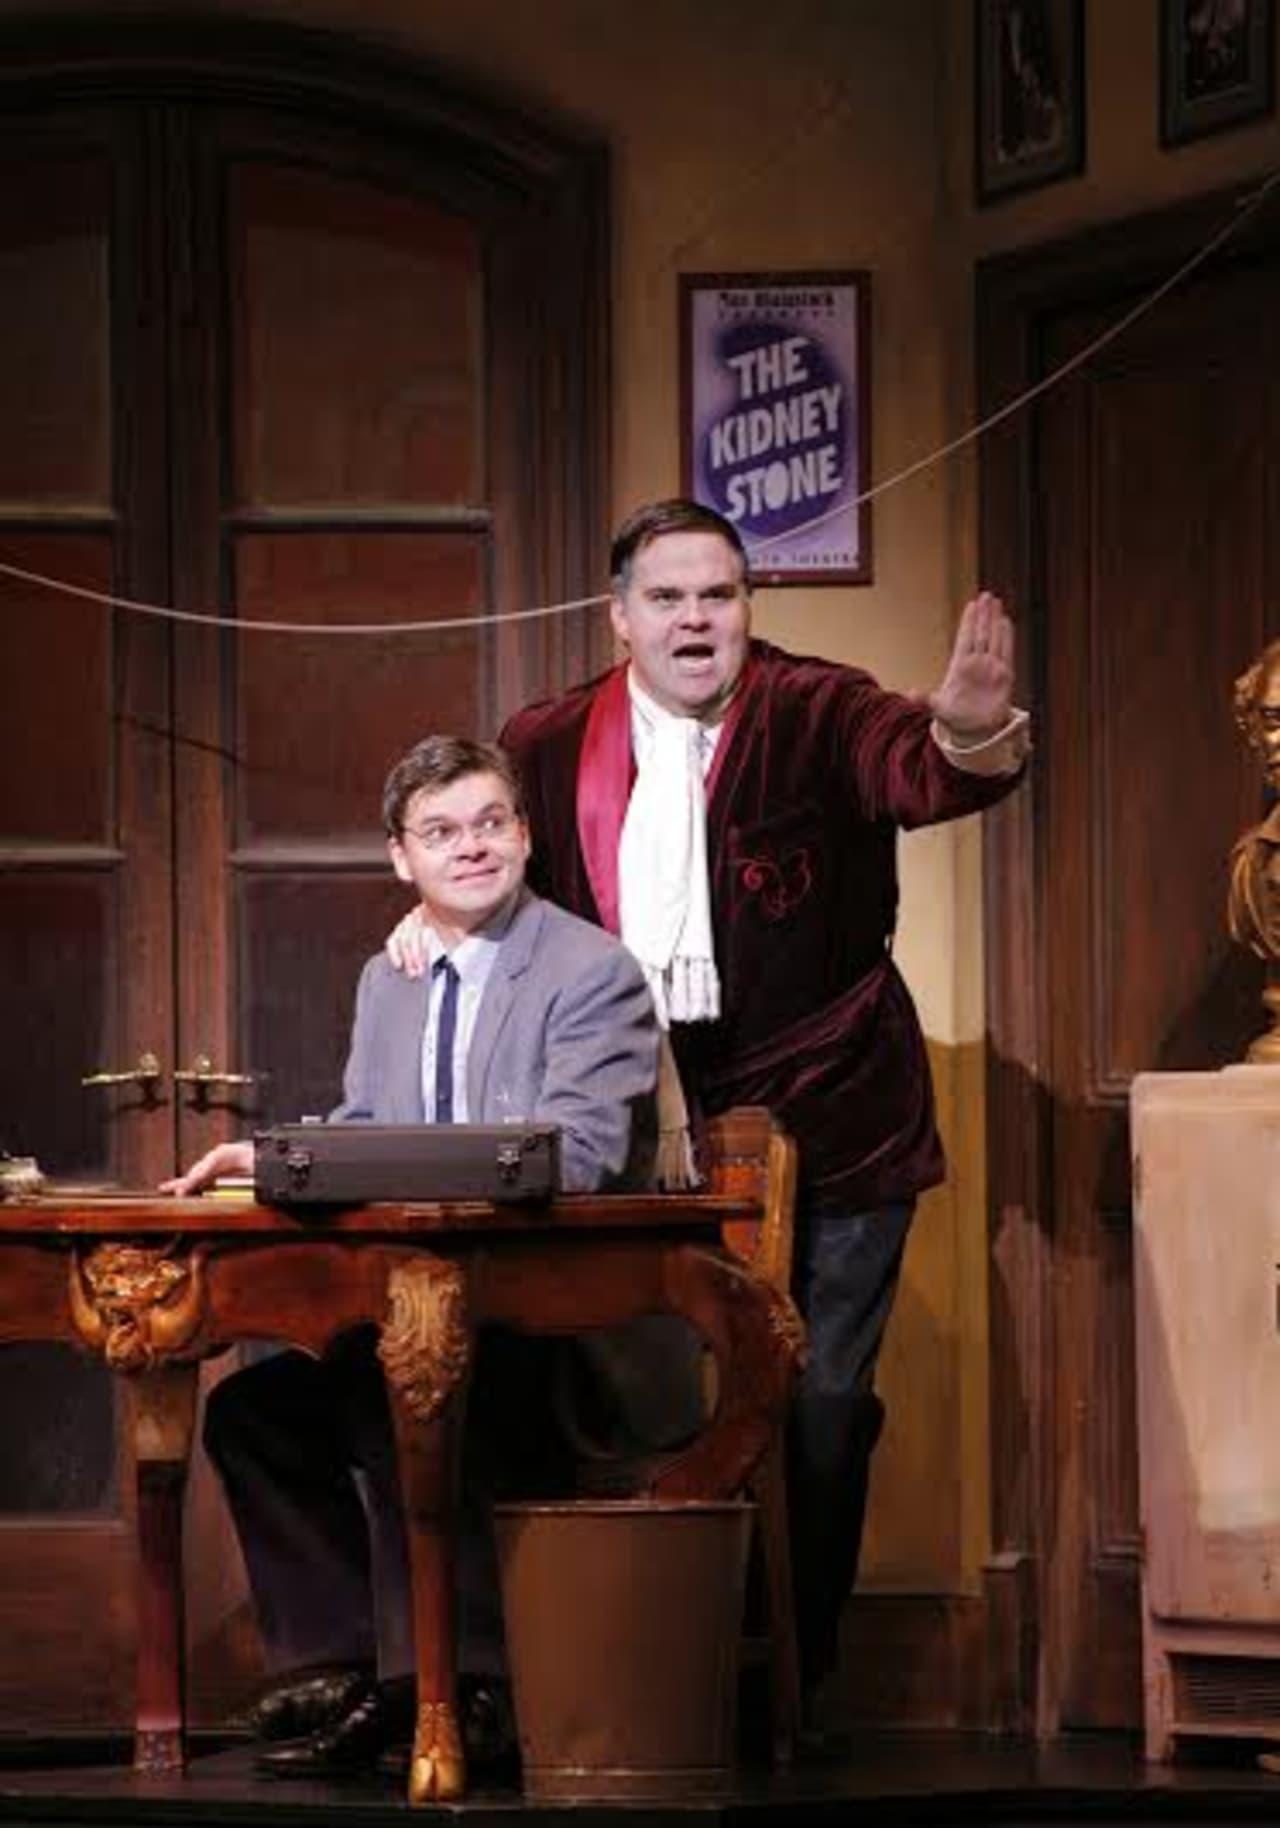 John Treacy Egan (right) star of "The Producers" will join with friends in performing an evening of classic Broadway show tunes on Saturday, Sept. 6 at Untermyer Park in Yonkers.